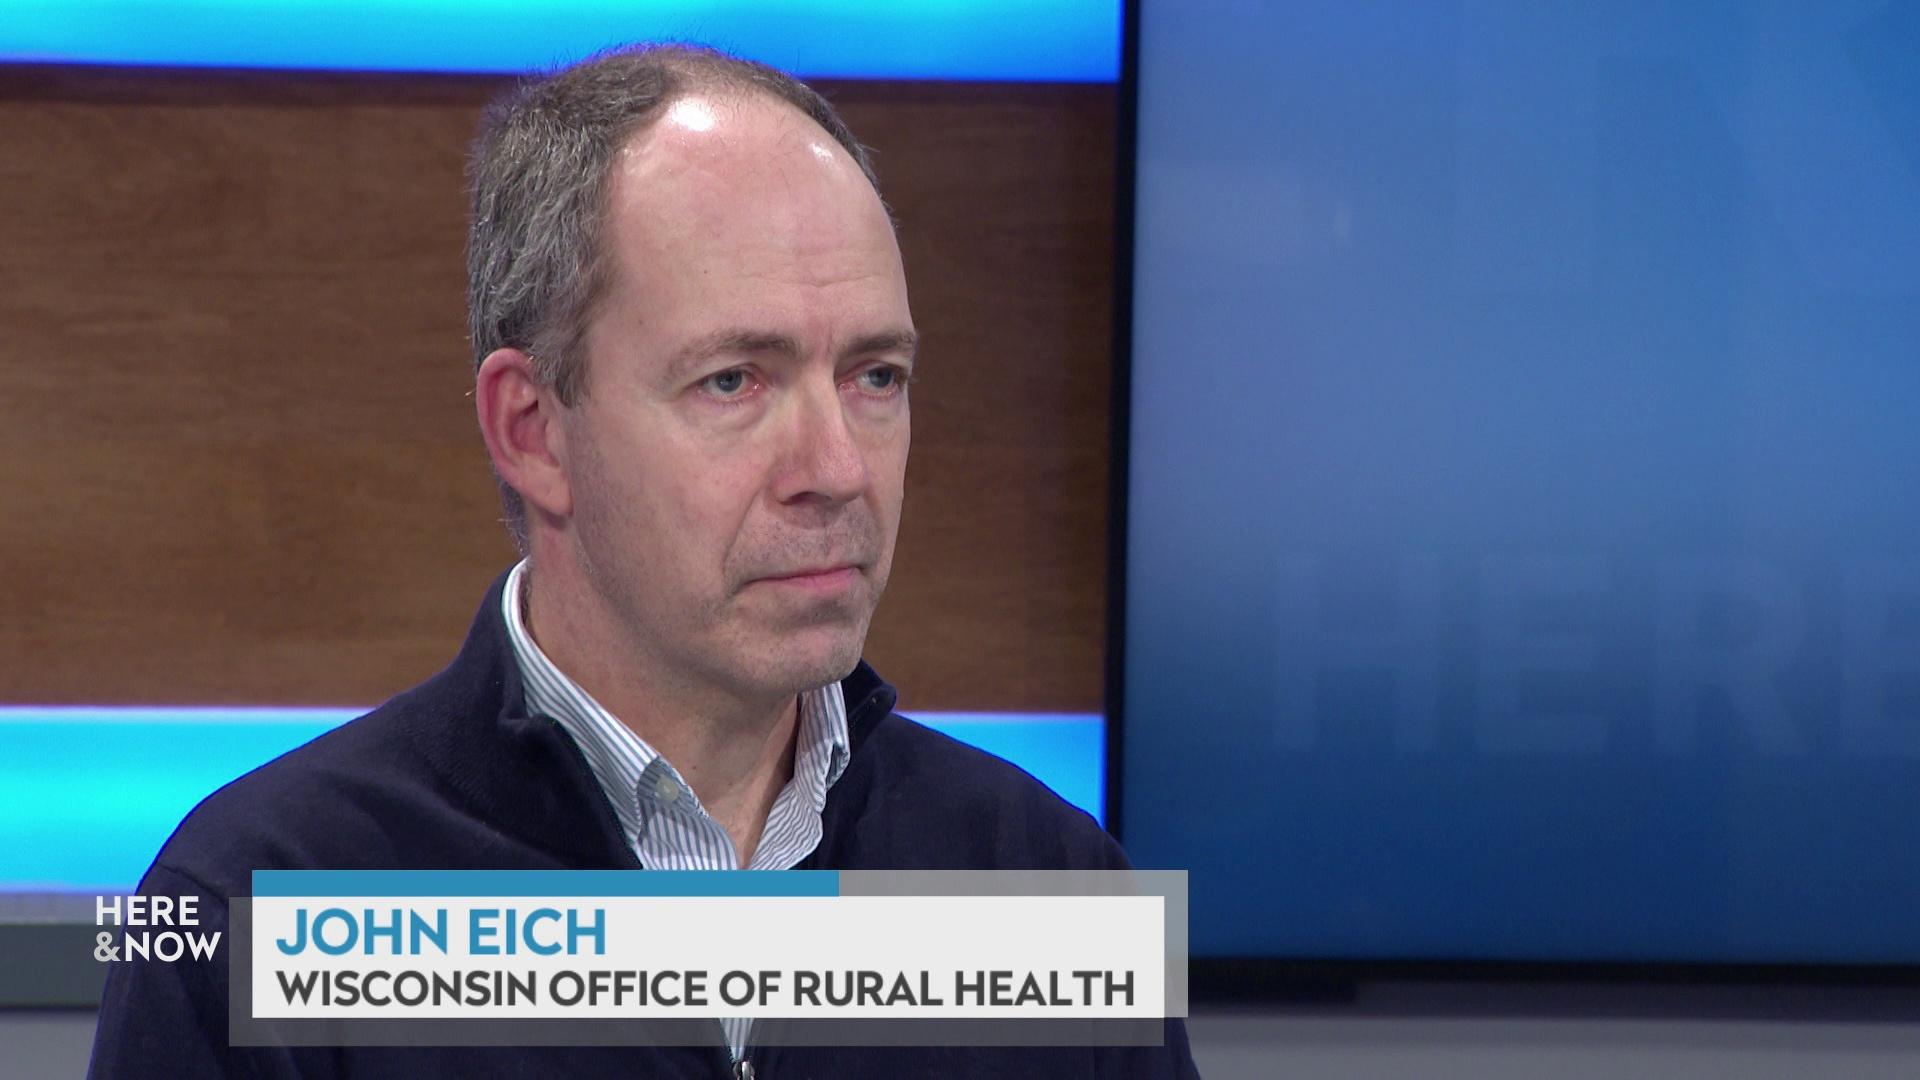 A still image shows John Eich seated at the 'Here & Now' set featuring wood paneling, with a graphic at bottom reading 'John Eich' and 'Wisconsin Office of Rural Health.'